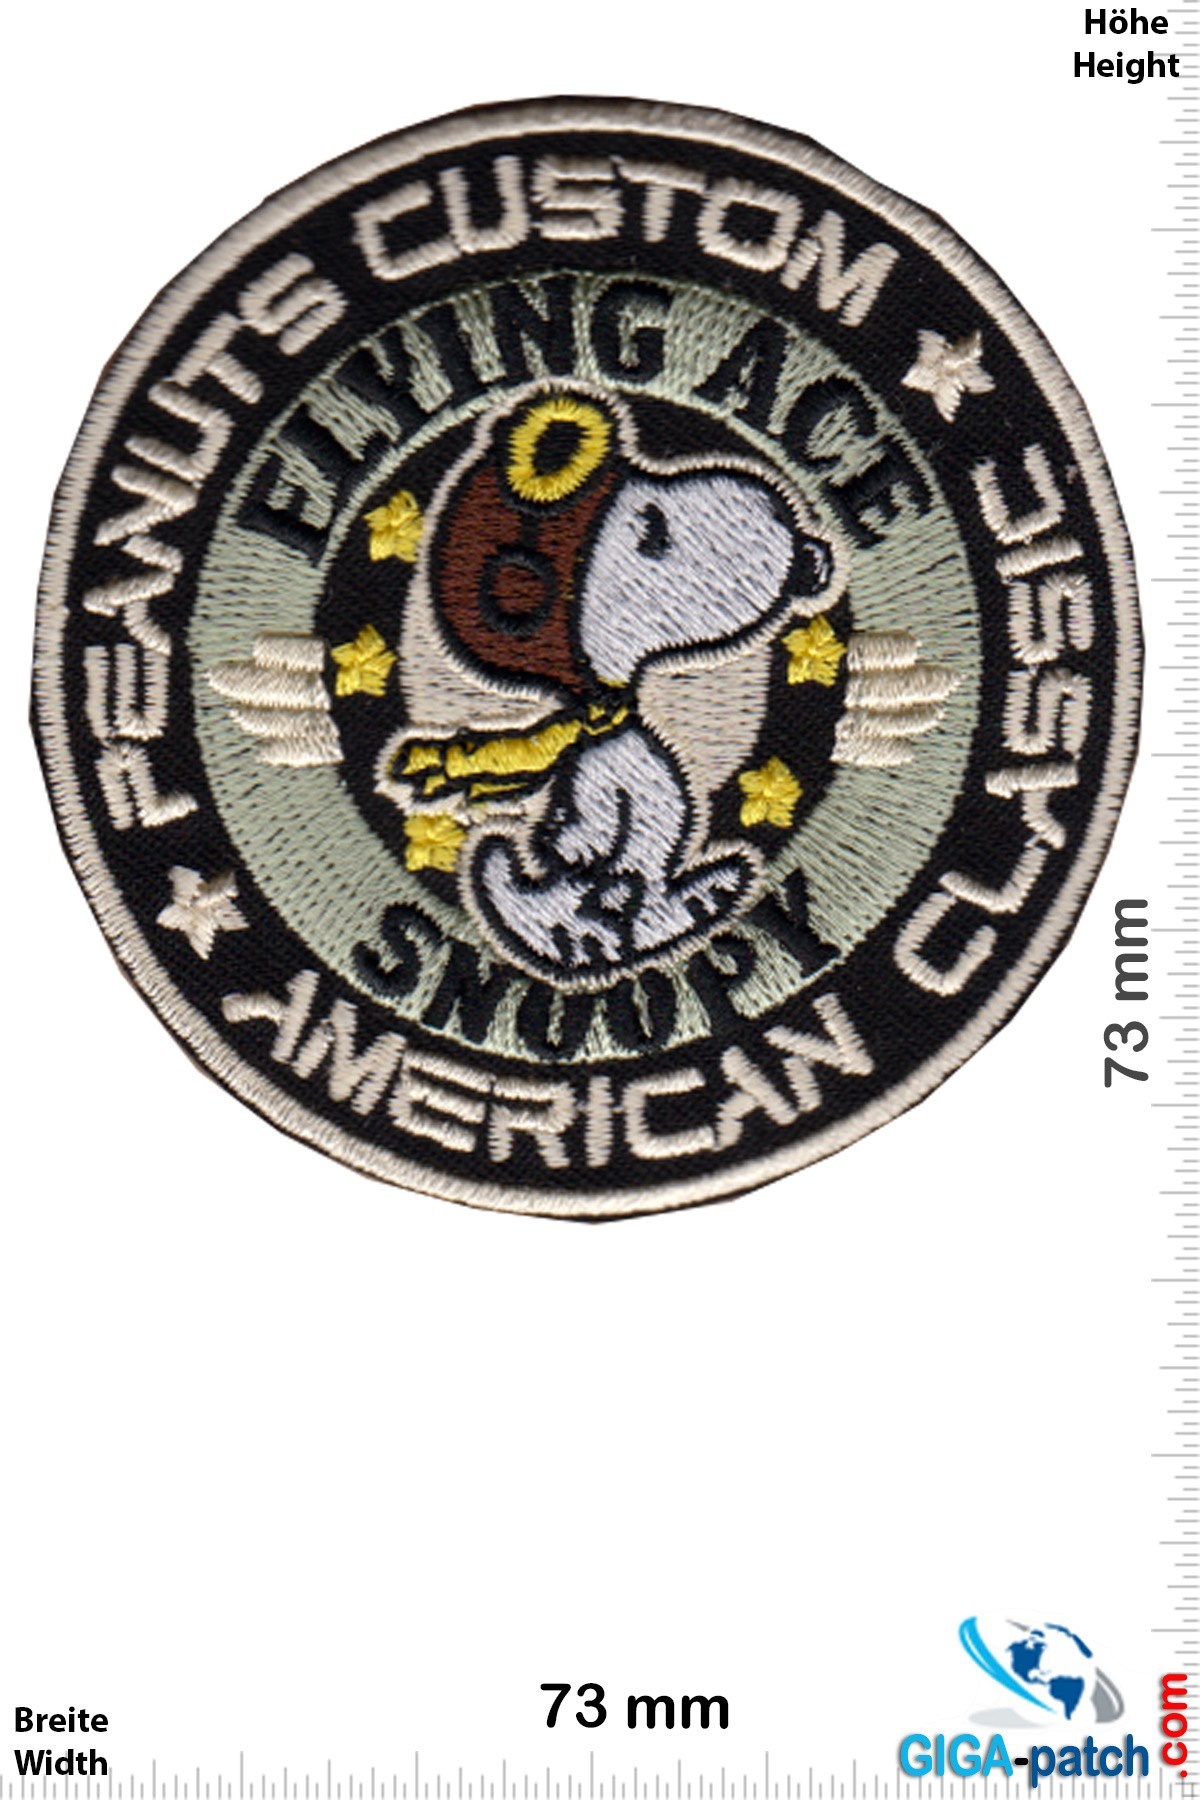 Snoopy Snoopy - Flying Ace - American Classic - Die Peanuts